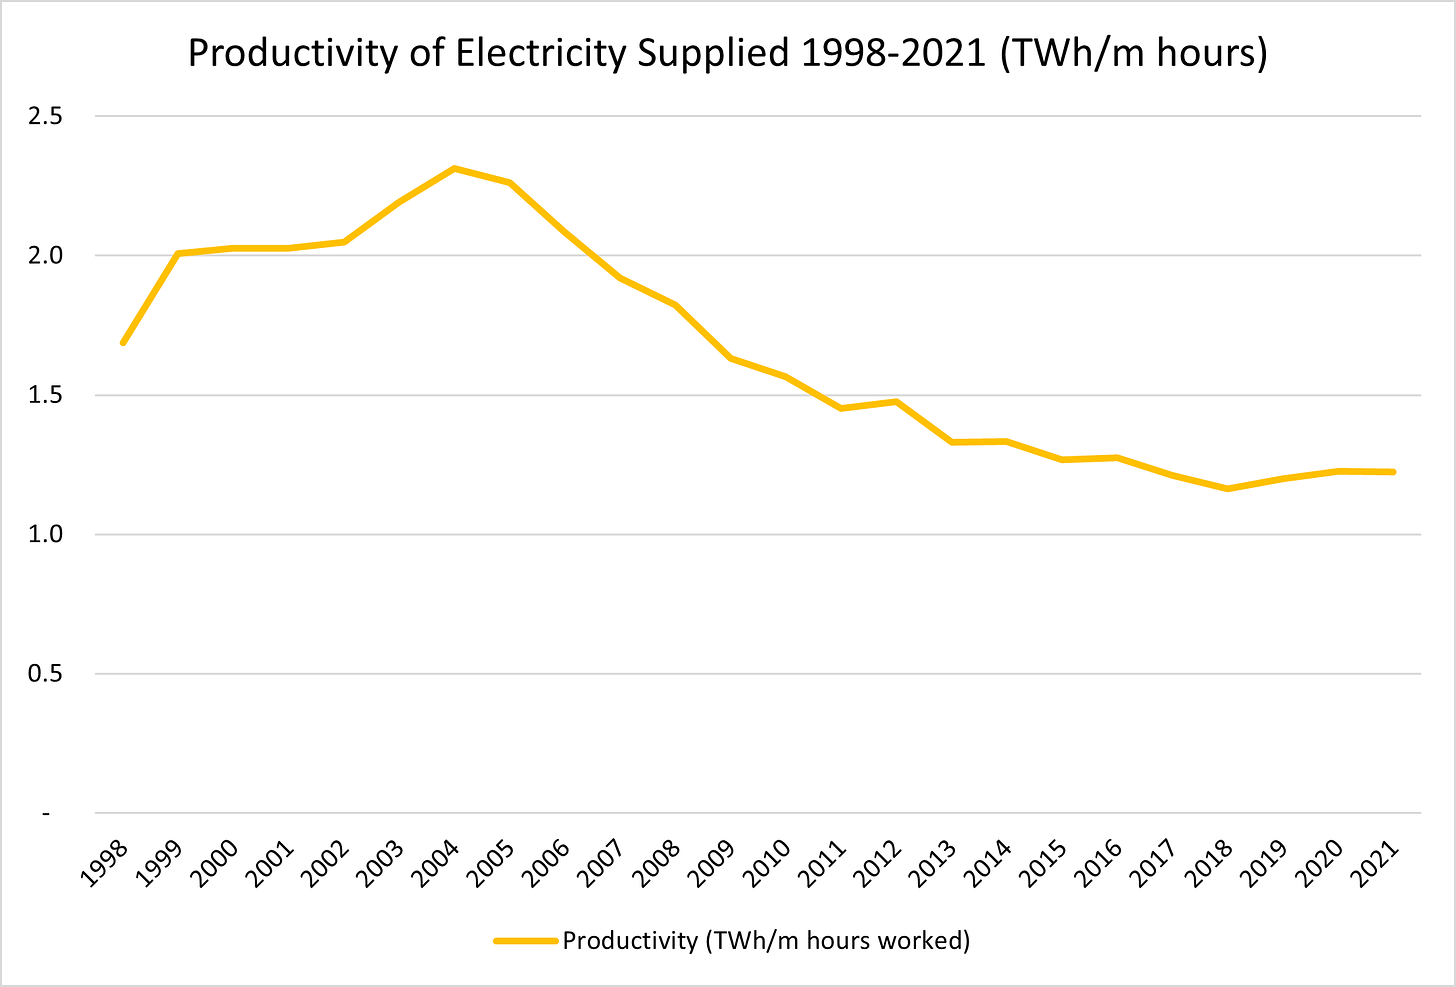 Subsidised Green Jobs leading killing real jobs - Falling Productivity in UK Electricity Production